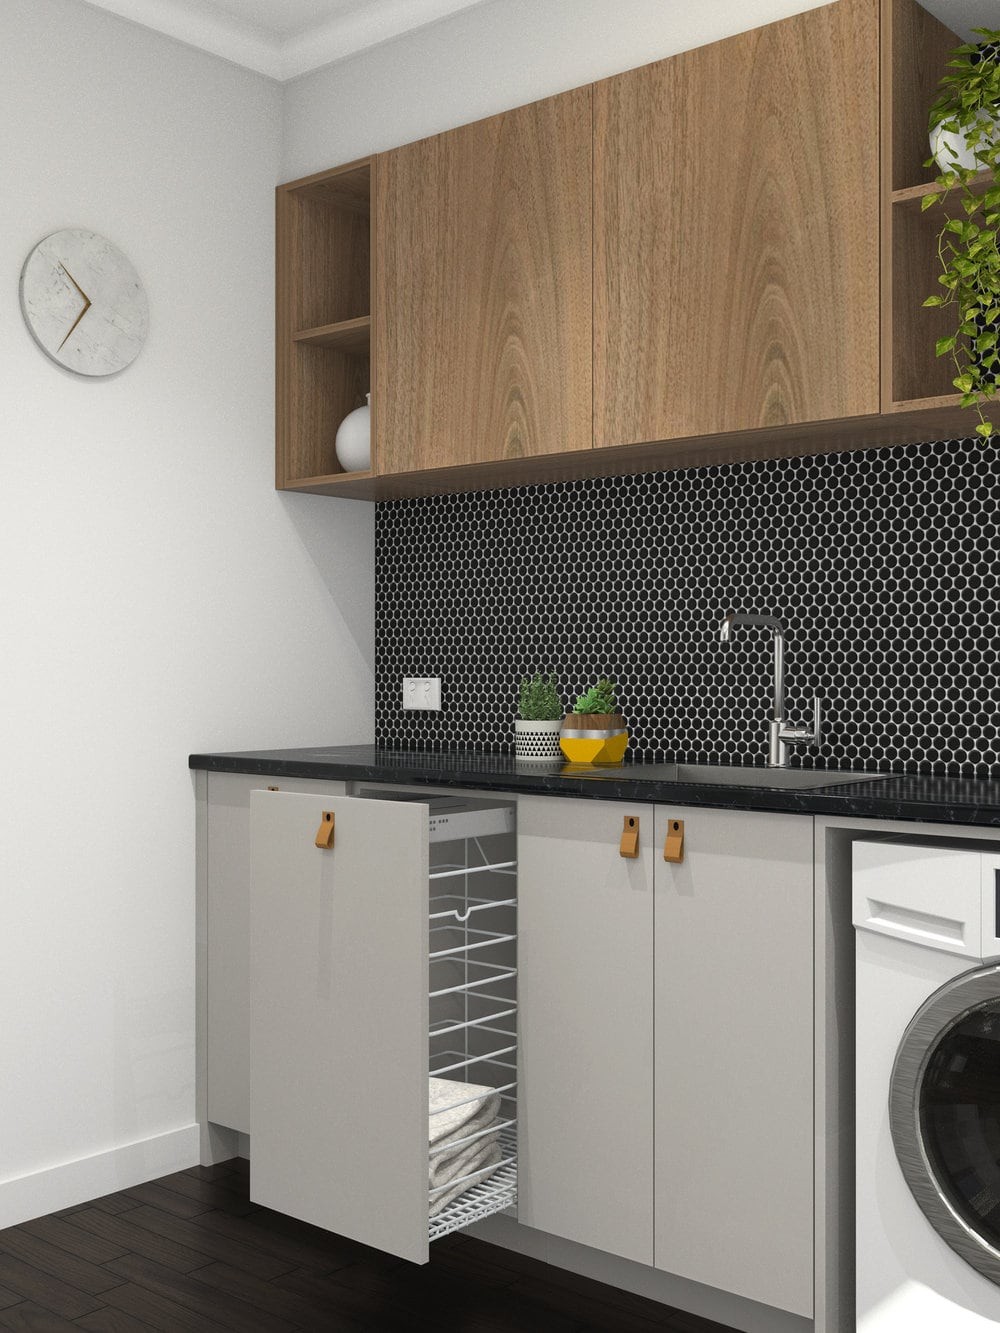 grey laundry room with black tiles and tan leather cabinetry handles